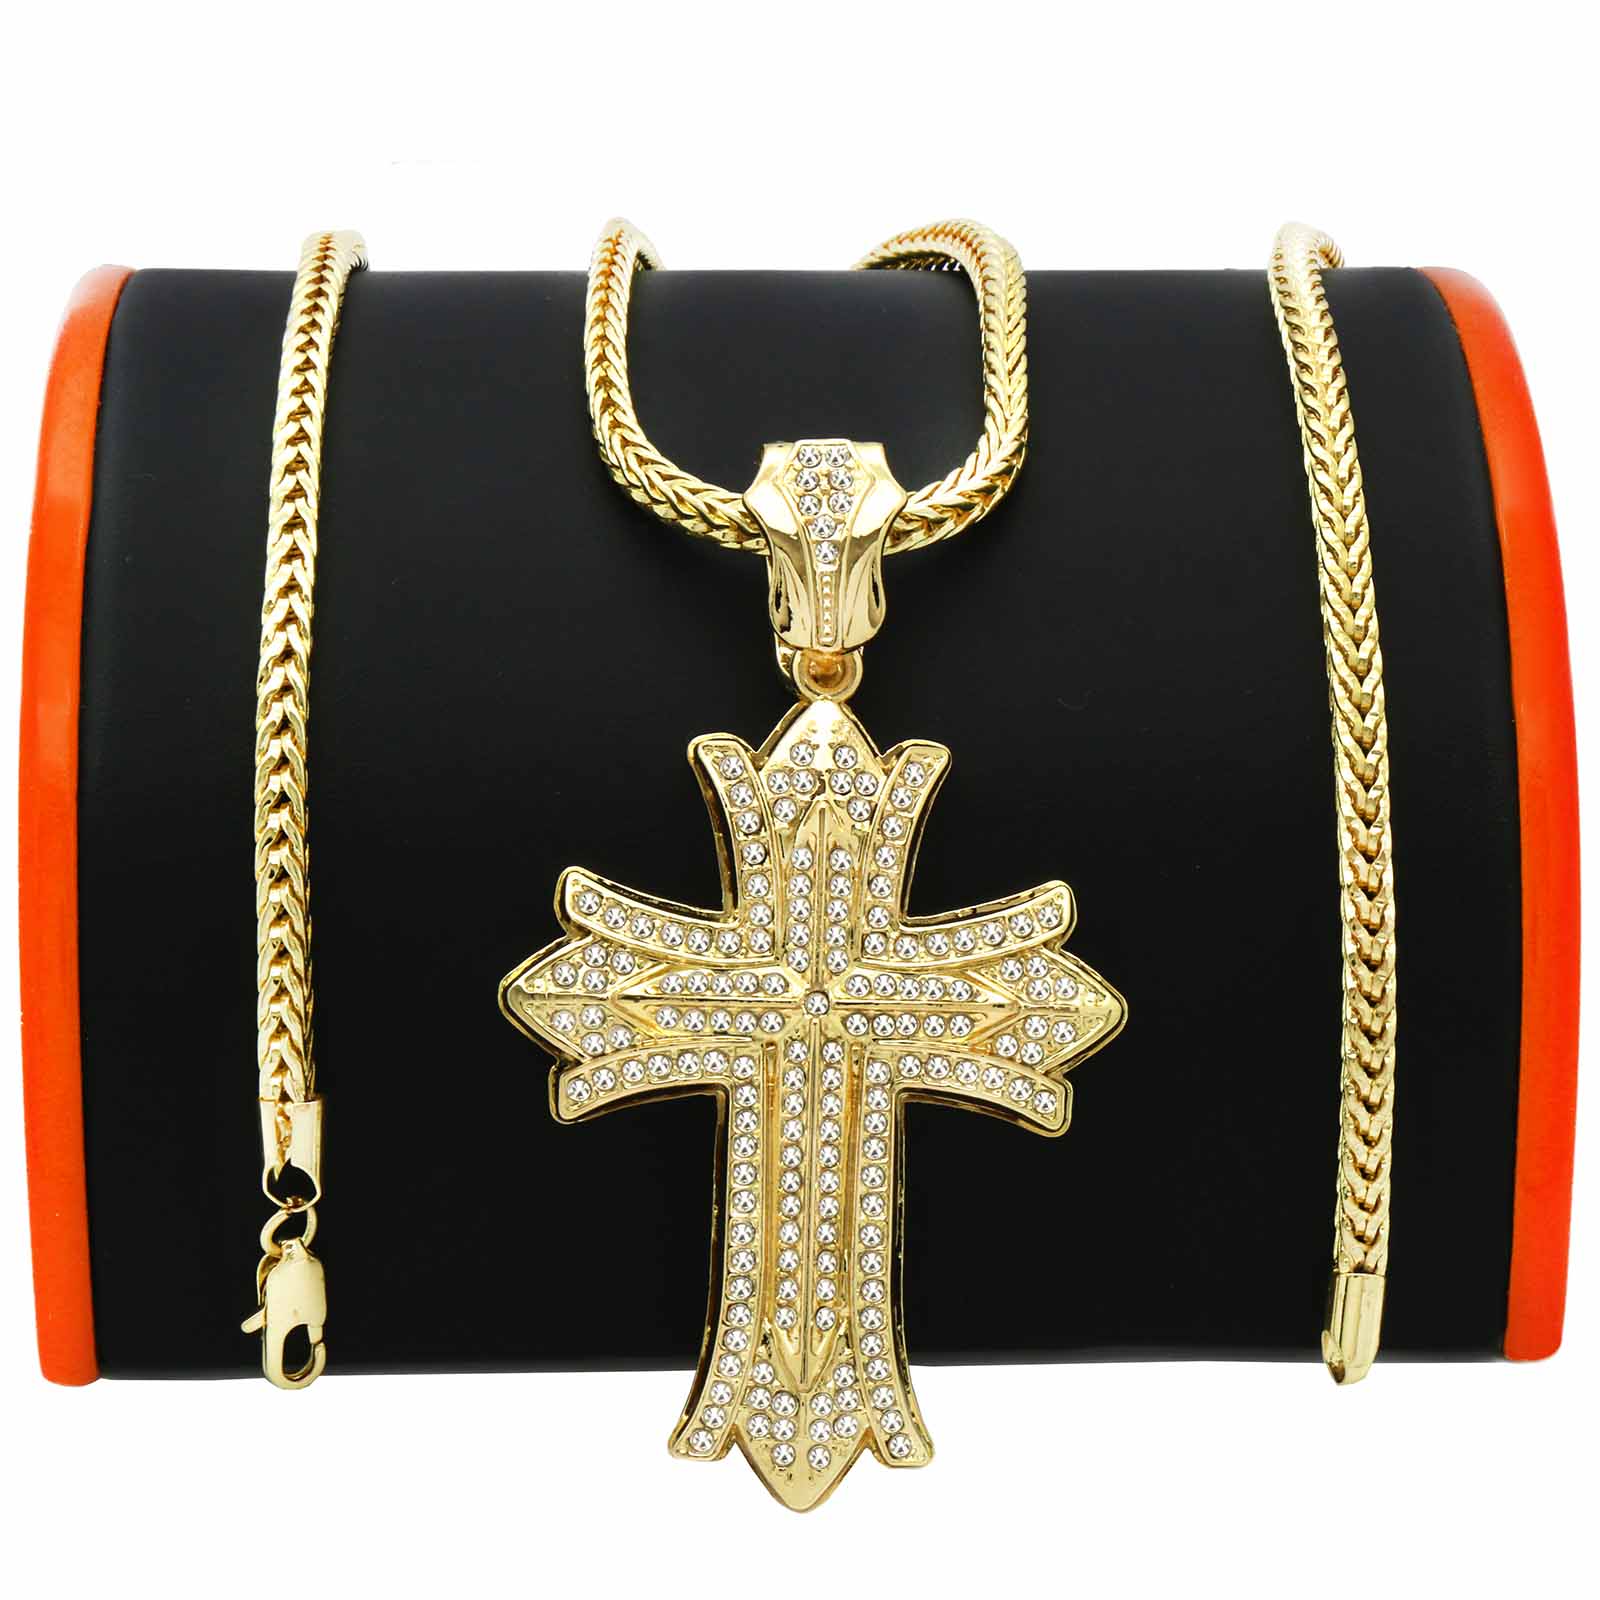 Gold Flared End Cross NECKLACE